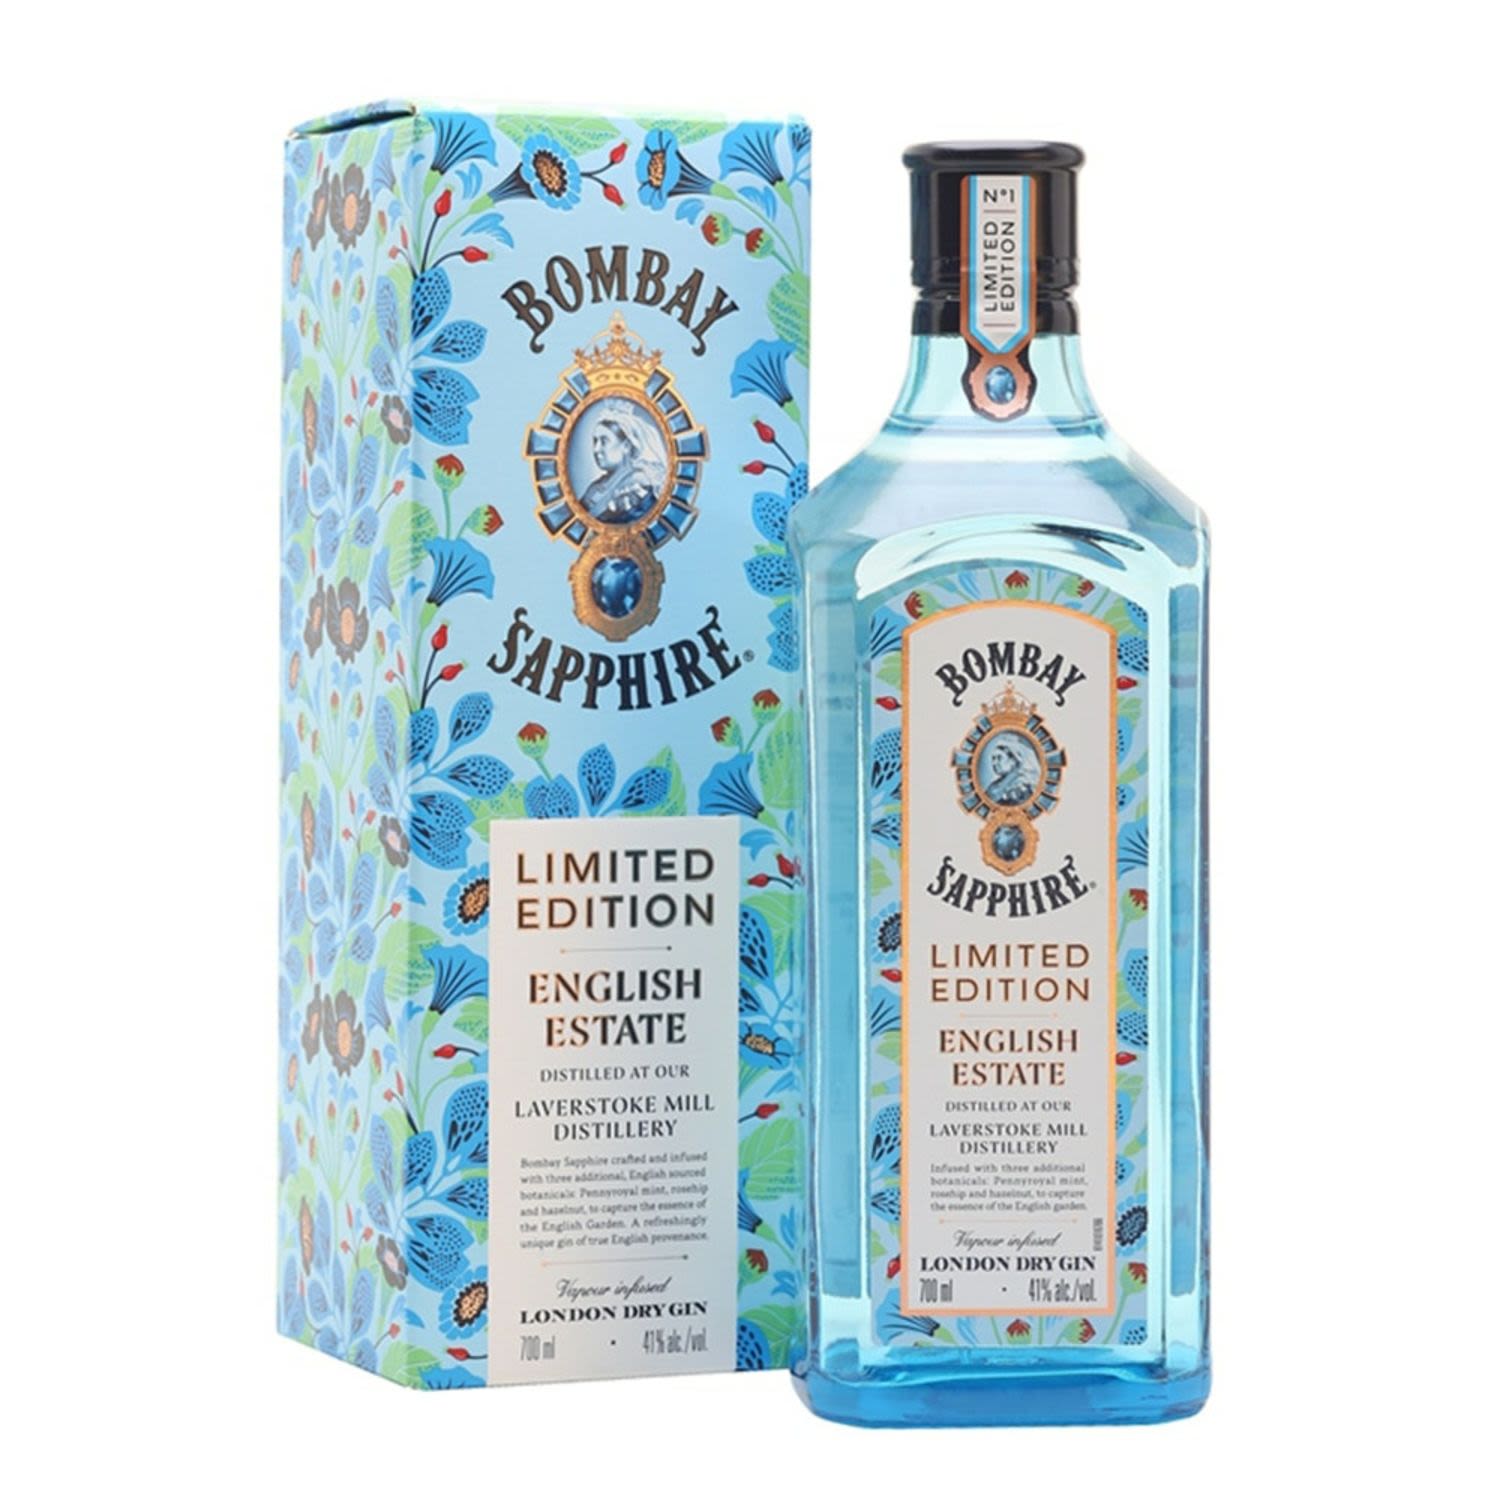 Bombay Sapphire English Estate Gin 700mL in a Gift Box. Enjoy this Gin expression long with freshly squeezed lemon juice, tonic or ginger ale, lots of ice and a sprig of mint to capture the true essence of refreshment and the English Countryside.Crafted by the Bombay Sapphire Master Distiller with botanicals sourced from the English countryside and distilled through our unique vapour infusion process at Laverstoke Mill distillery in Hampshire.<br /> <br />Alcohol Volume: 41.00%<br /><br />Pack Format: Bottle<br /><br />Standard Drinks: 23</br /><br />Pack Type: Bottle<br /><br />Country of Origin: England<br />